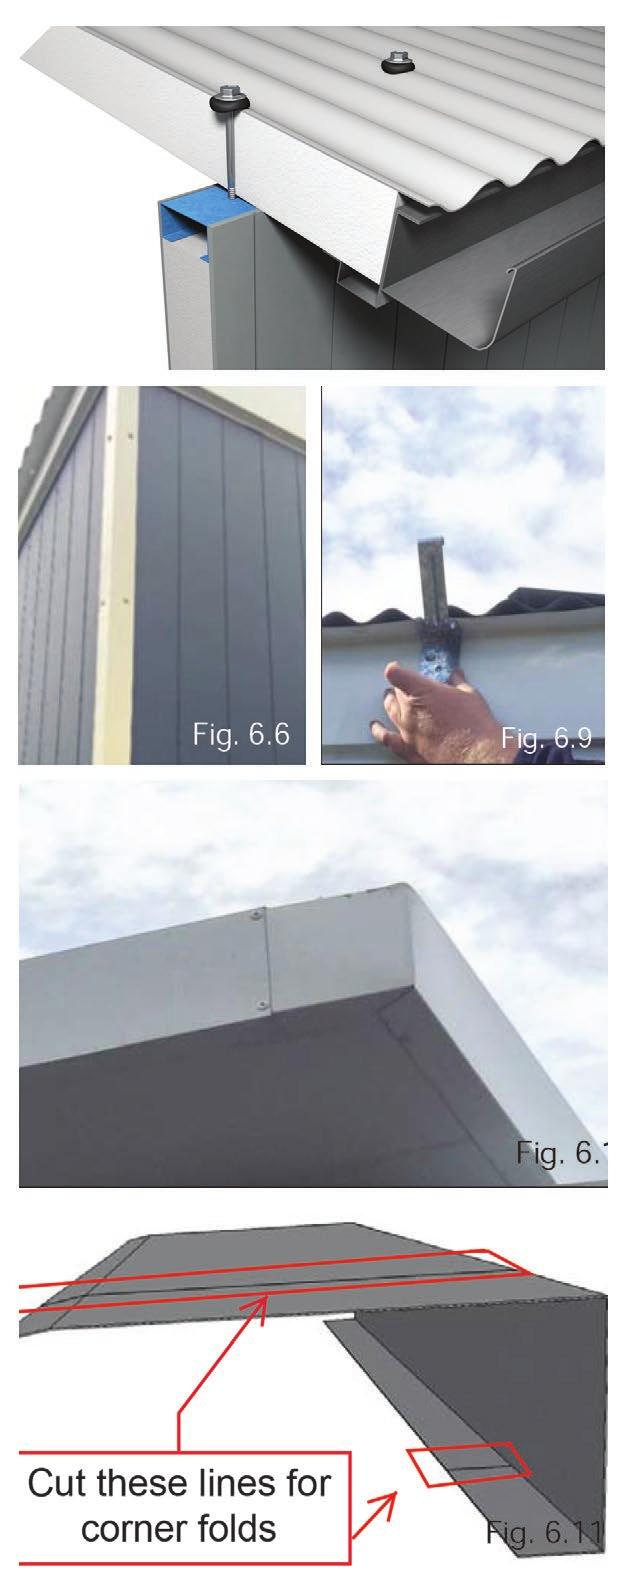 6 STEP 6 ROOF AND WALL FLASHINGS TRIMS INSULSPAN ROOF // Start with the 2 External Wall Corner Caps - On elevation 1 and 3, Fit the External 40mm x 40mm Corner Angles (QBRF4040C) with #12 Tek Screws